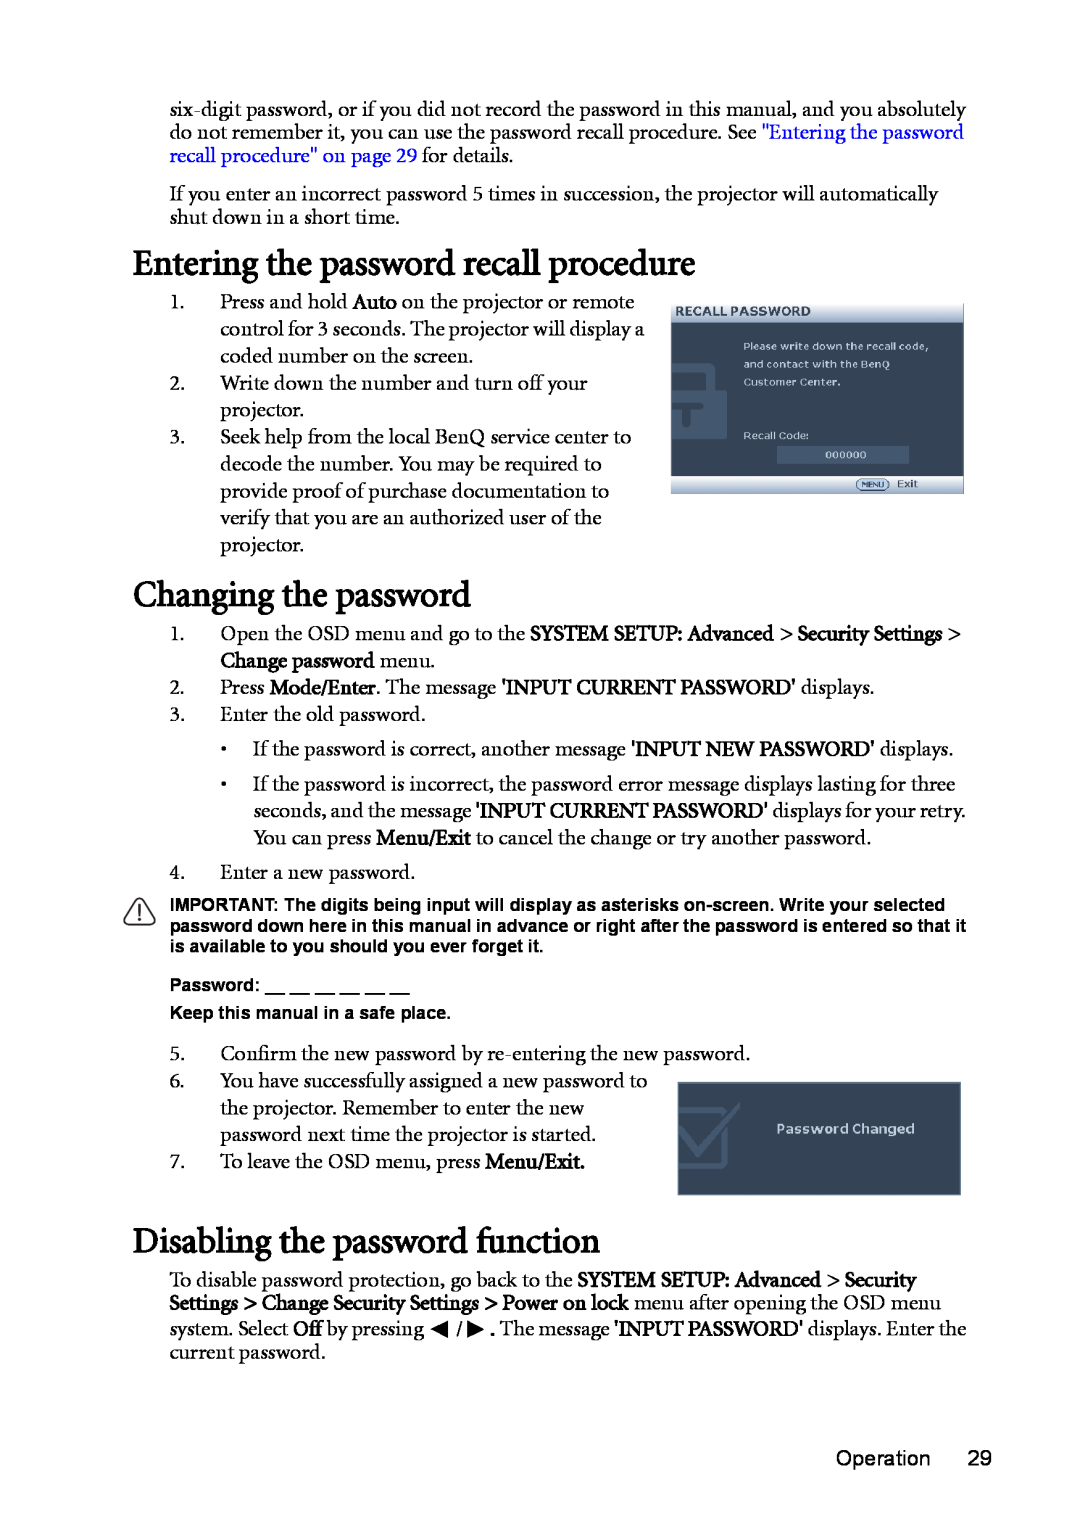 BenQ MX511 user manual Entering the password recall procedure, Changing the password, Disabling the password function 